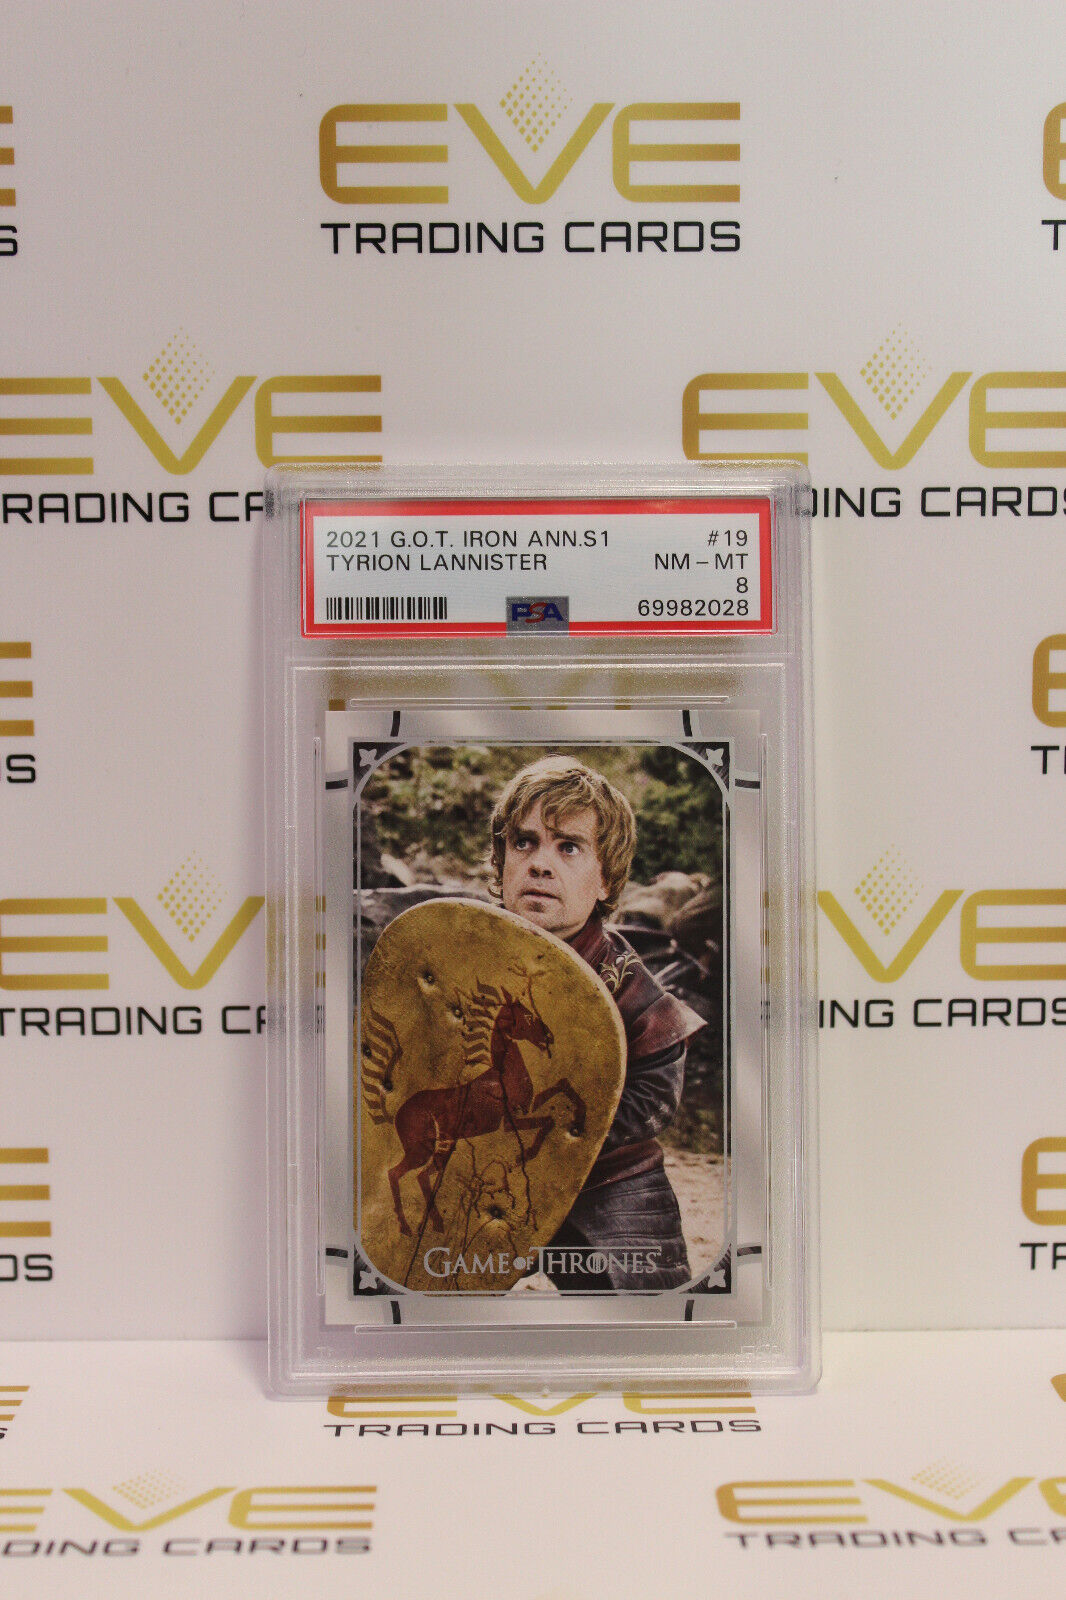 Graded Game of Thrones Card - 2021 Tyrion Lannister - PSA 8